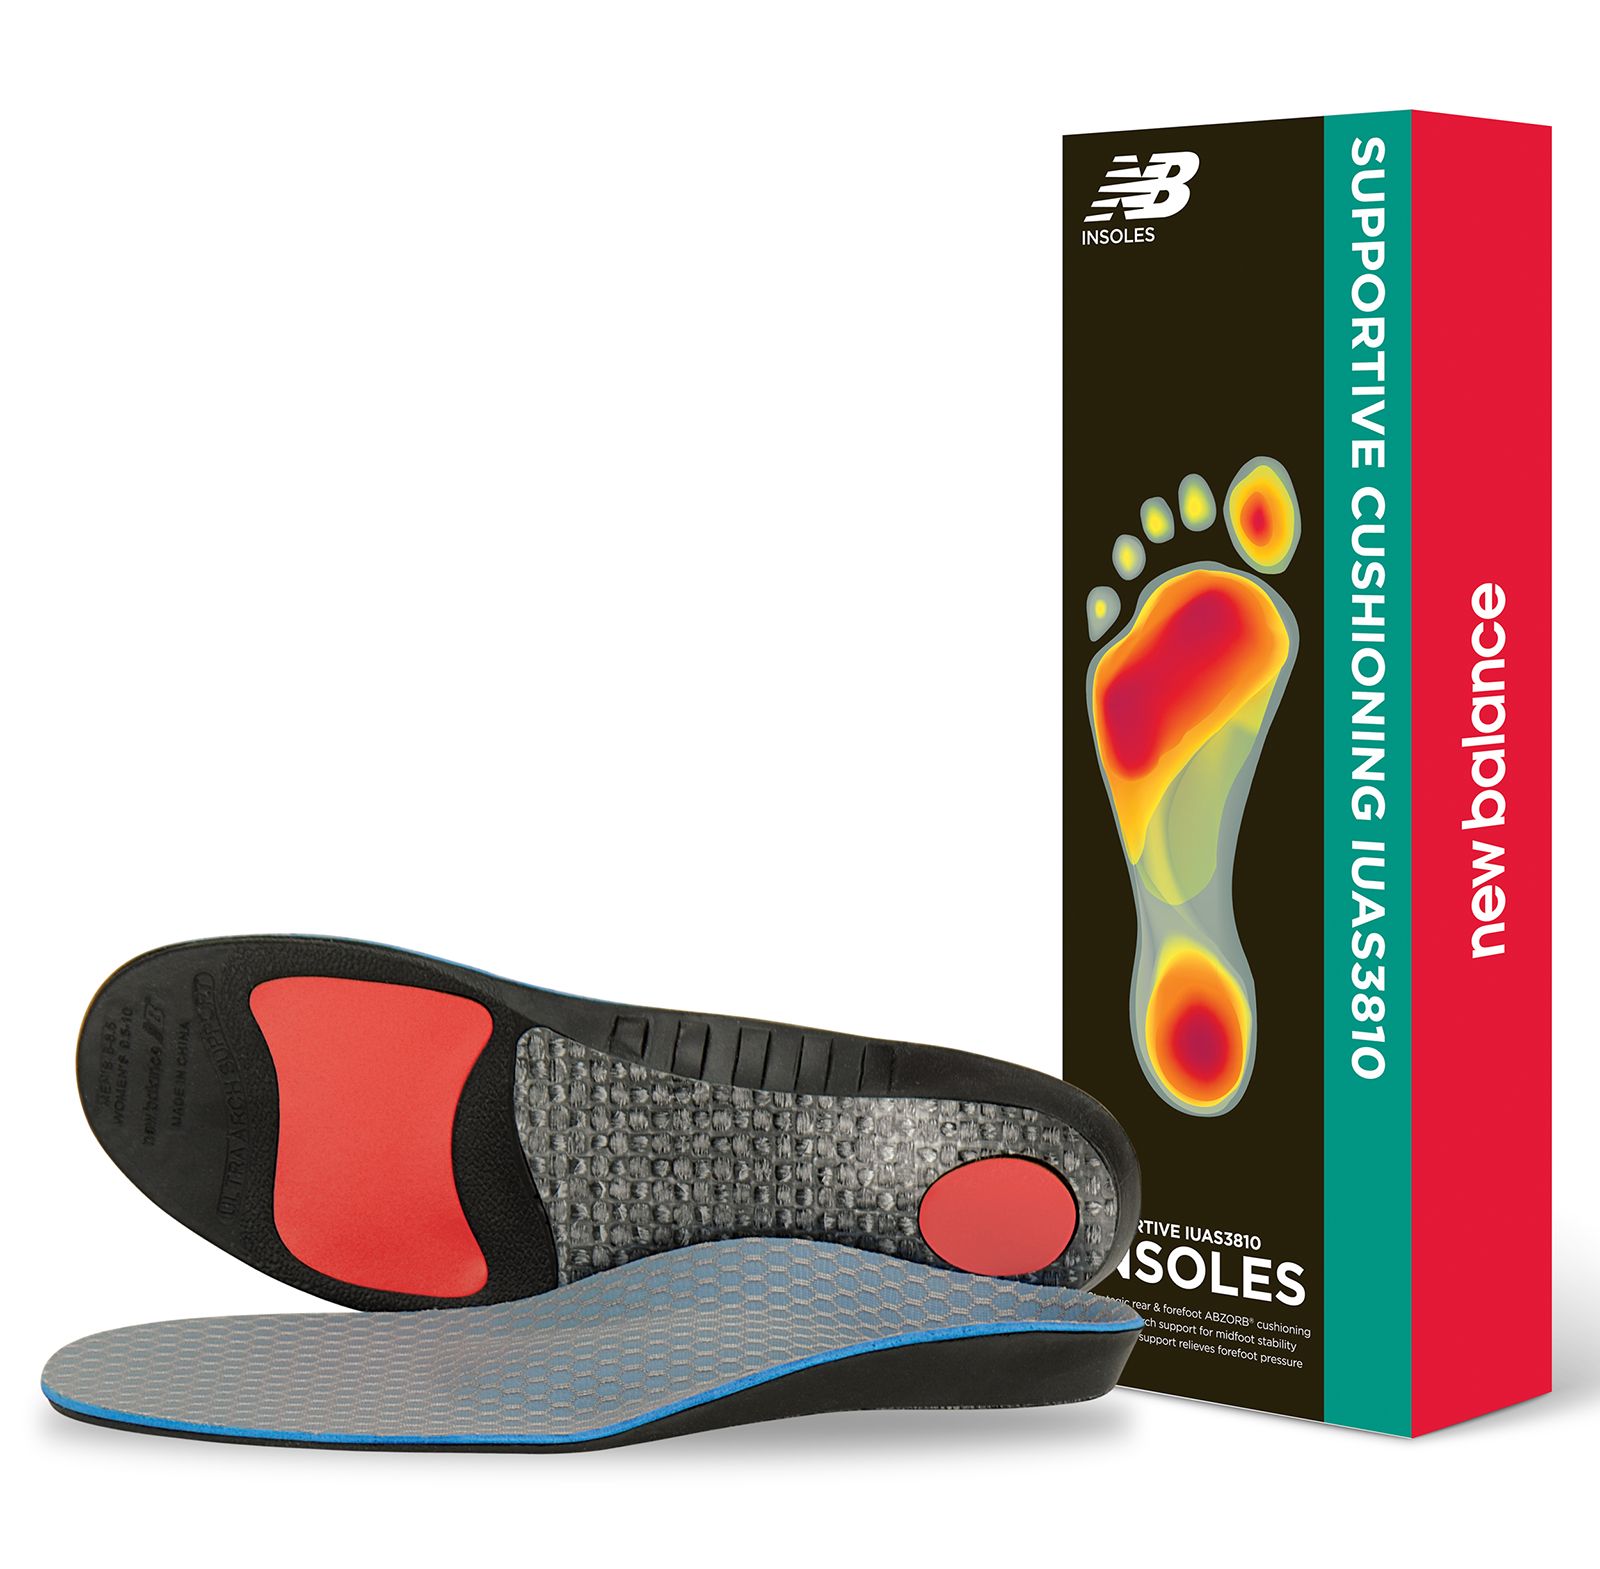 new balance insoles 3810 ultra support